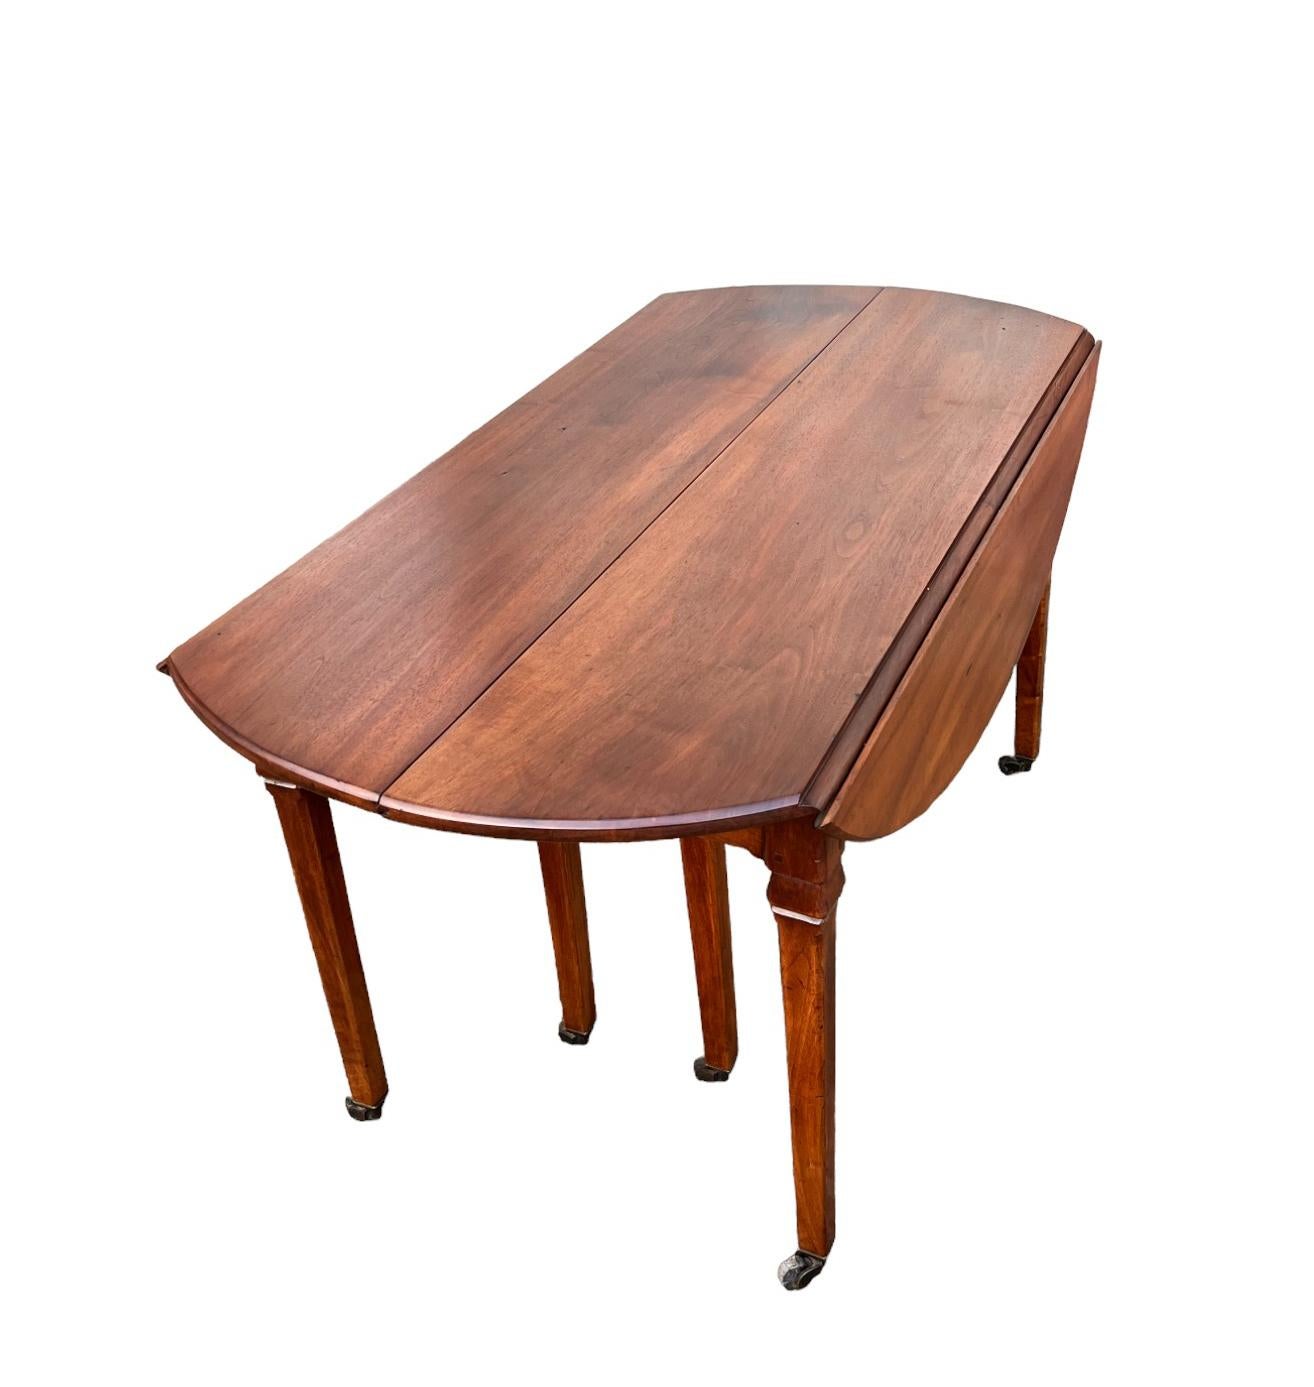 Large banquet or conference table, in a massive walnut, from the end of the eighteenth century.

It opens by 7 extensions also in solid walnut to reach the length of 566 cm (222.8 inches) and rests a base in a chamfered sheath, carved in the upper